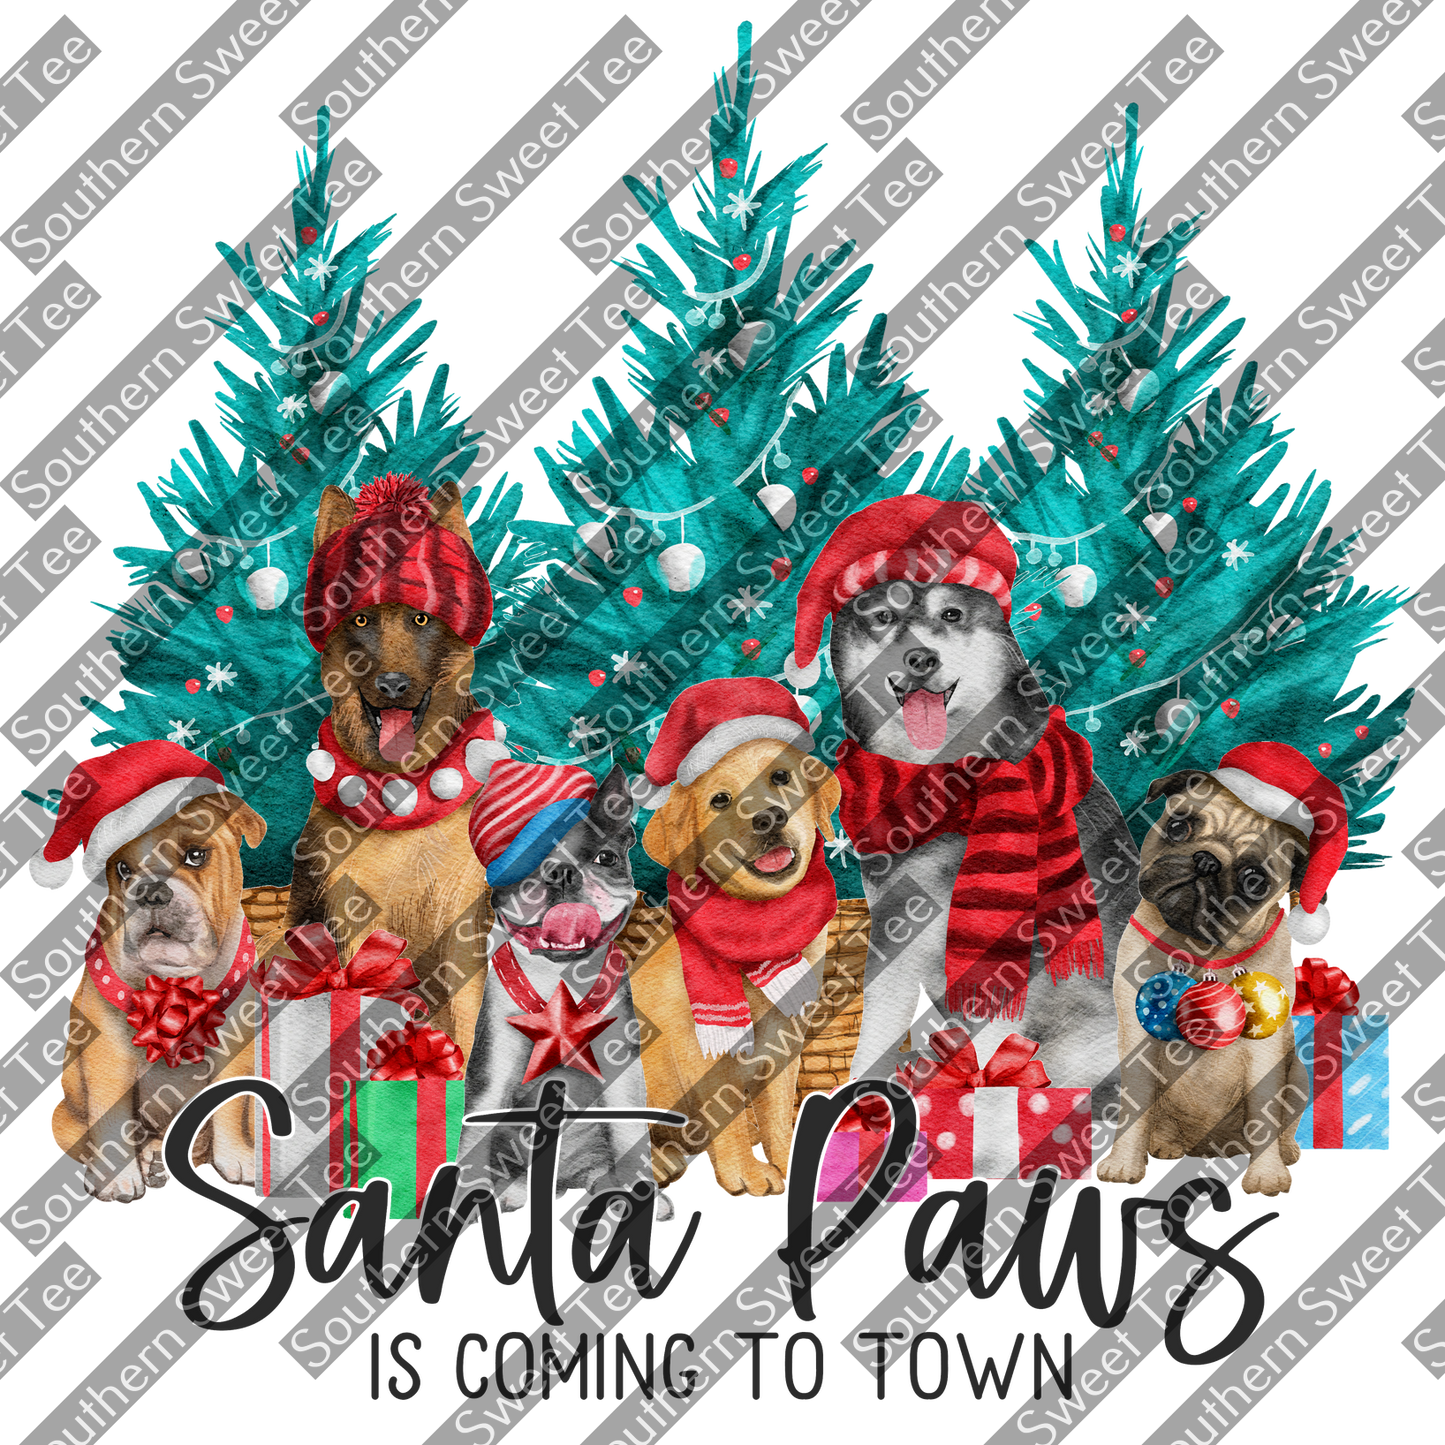 santa paws is coming  to town .ss21